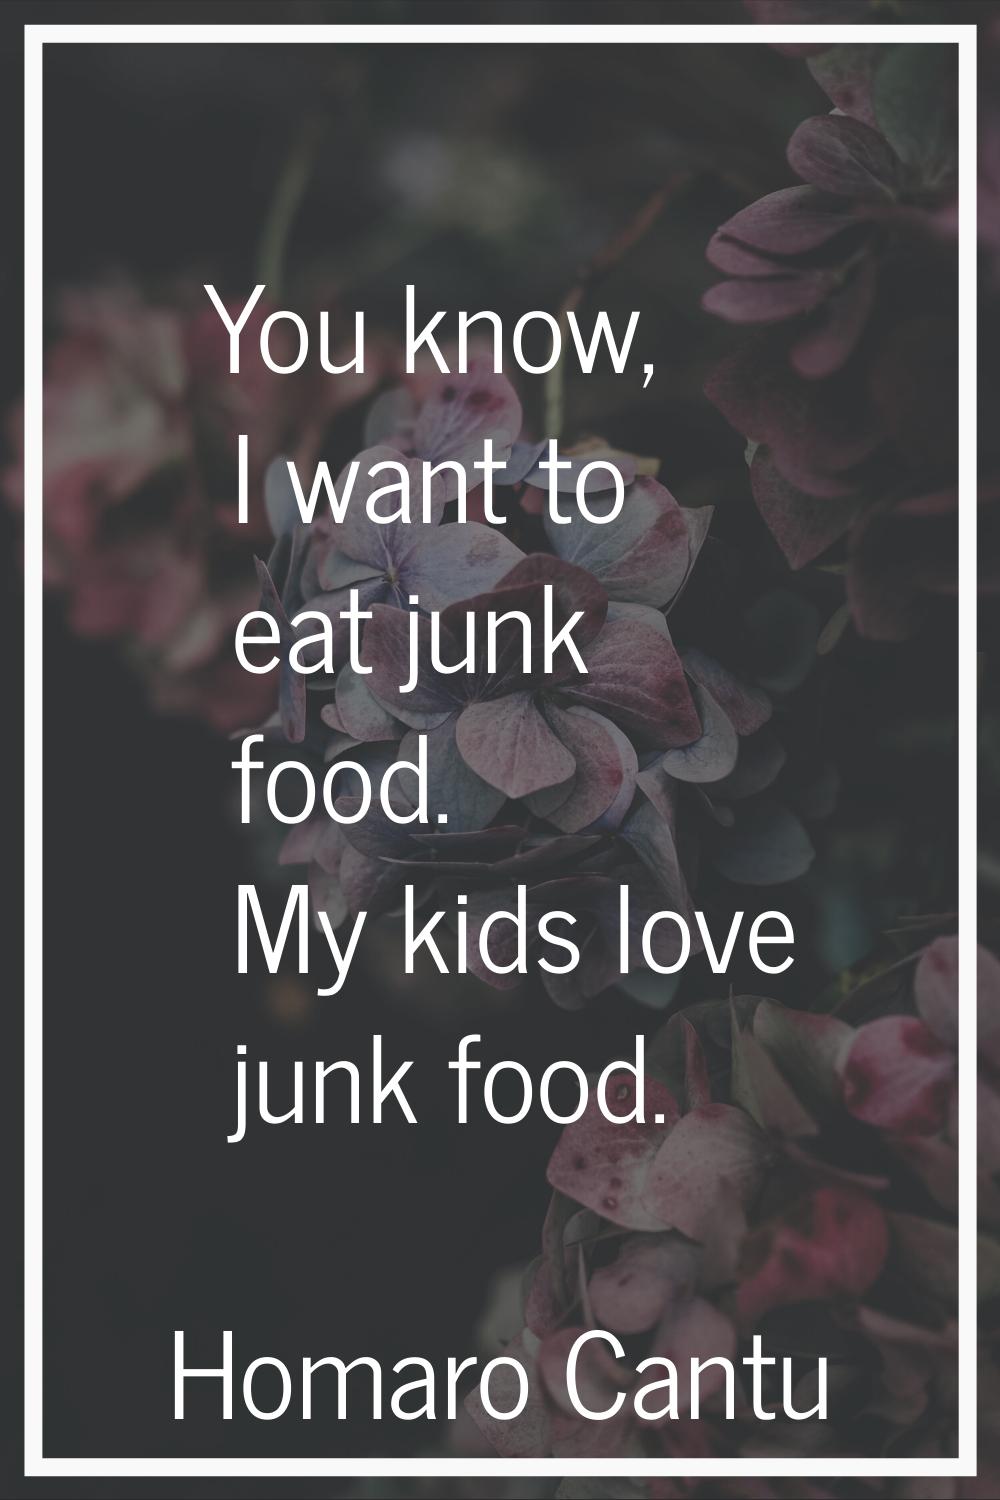 You know, I want to eat junk food. My kids love junk food.